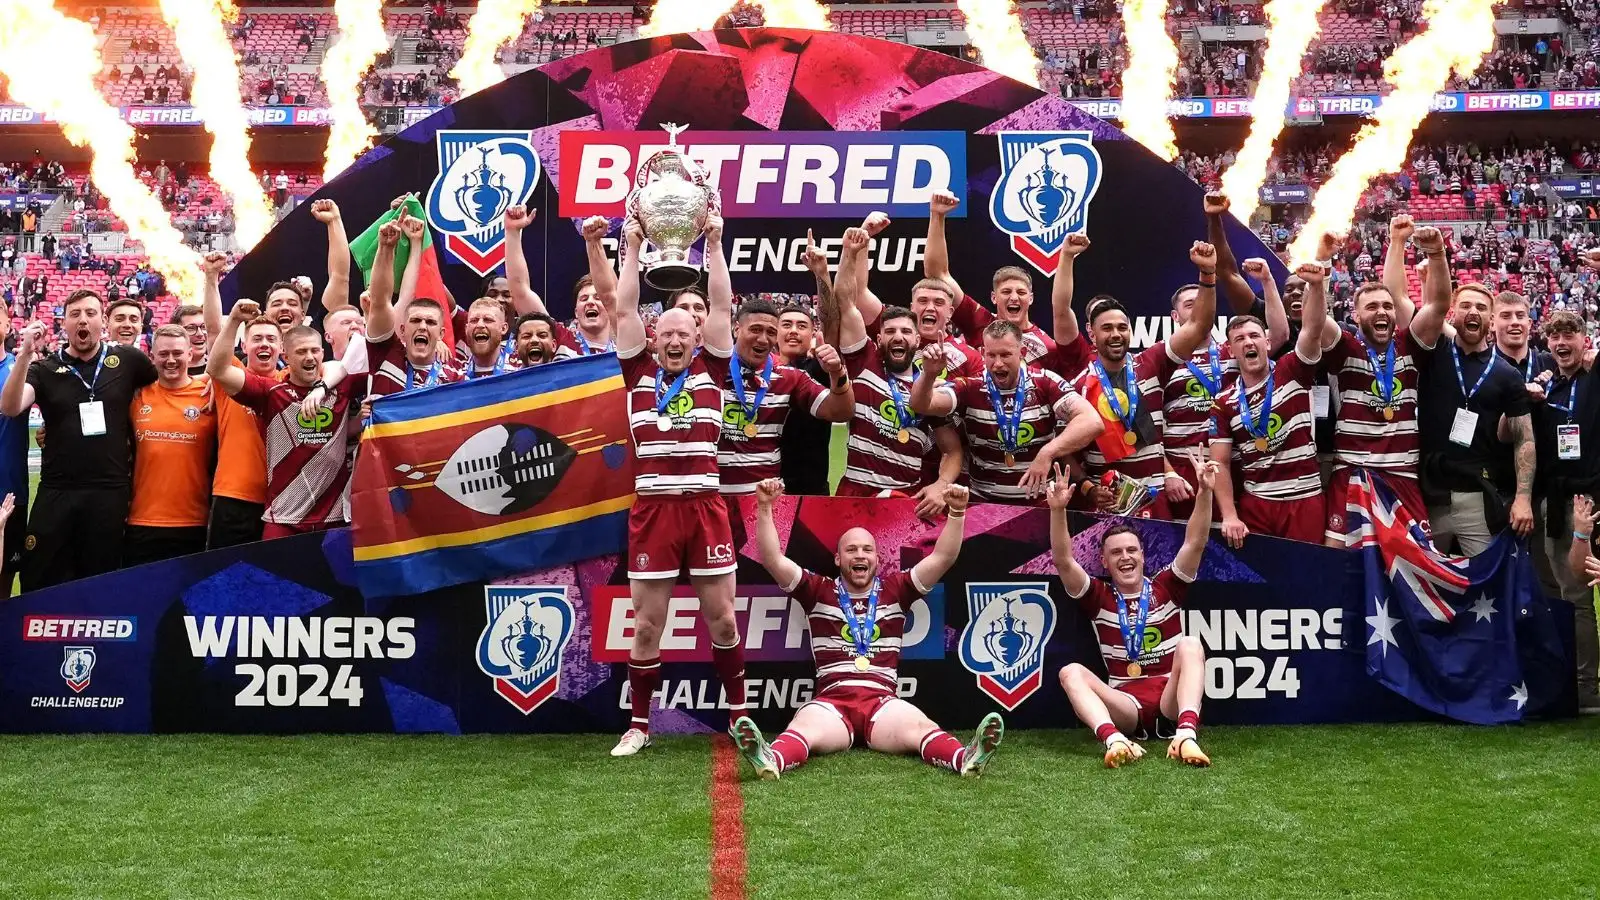 Challenge Cup to undergo major 2025 revamp as Super League entry point changes